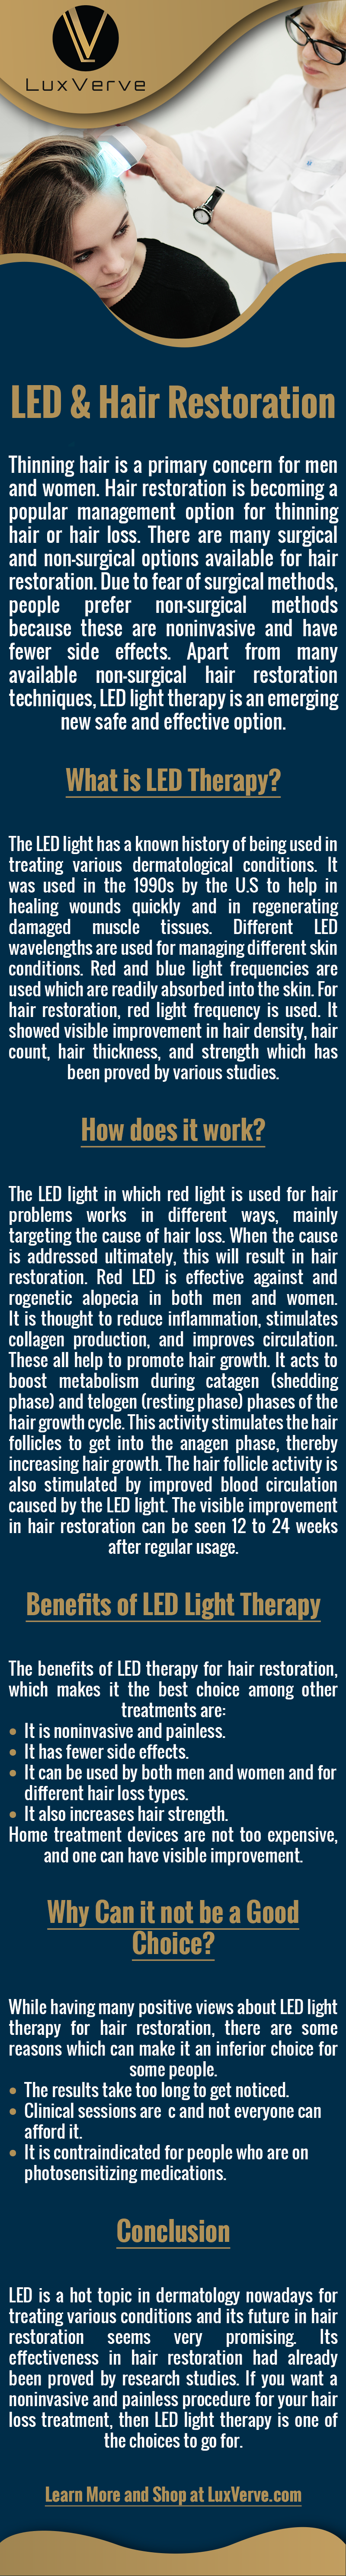 Laser hair treatment with the “Lux Laser Hair Growth Therapy” is a painless and effective way to create a fuller head of hair through laser therapy to revitalize and nourish hair follicles. Clinical strength hair regrowth technology combats thinning hair for men and women.